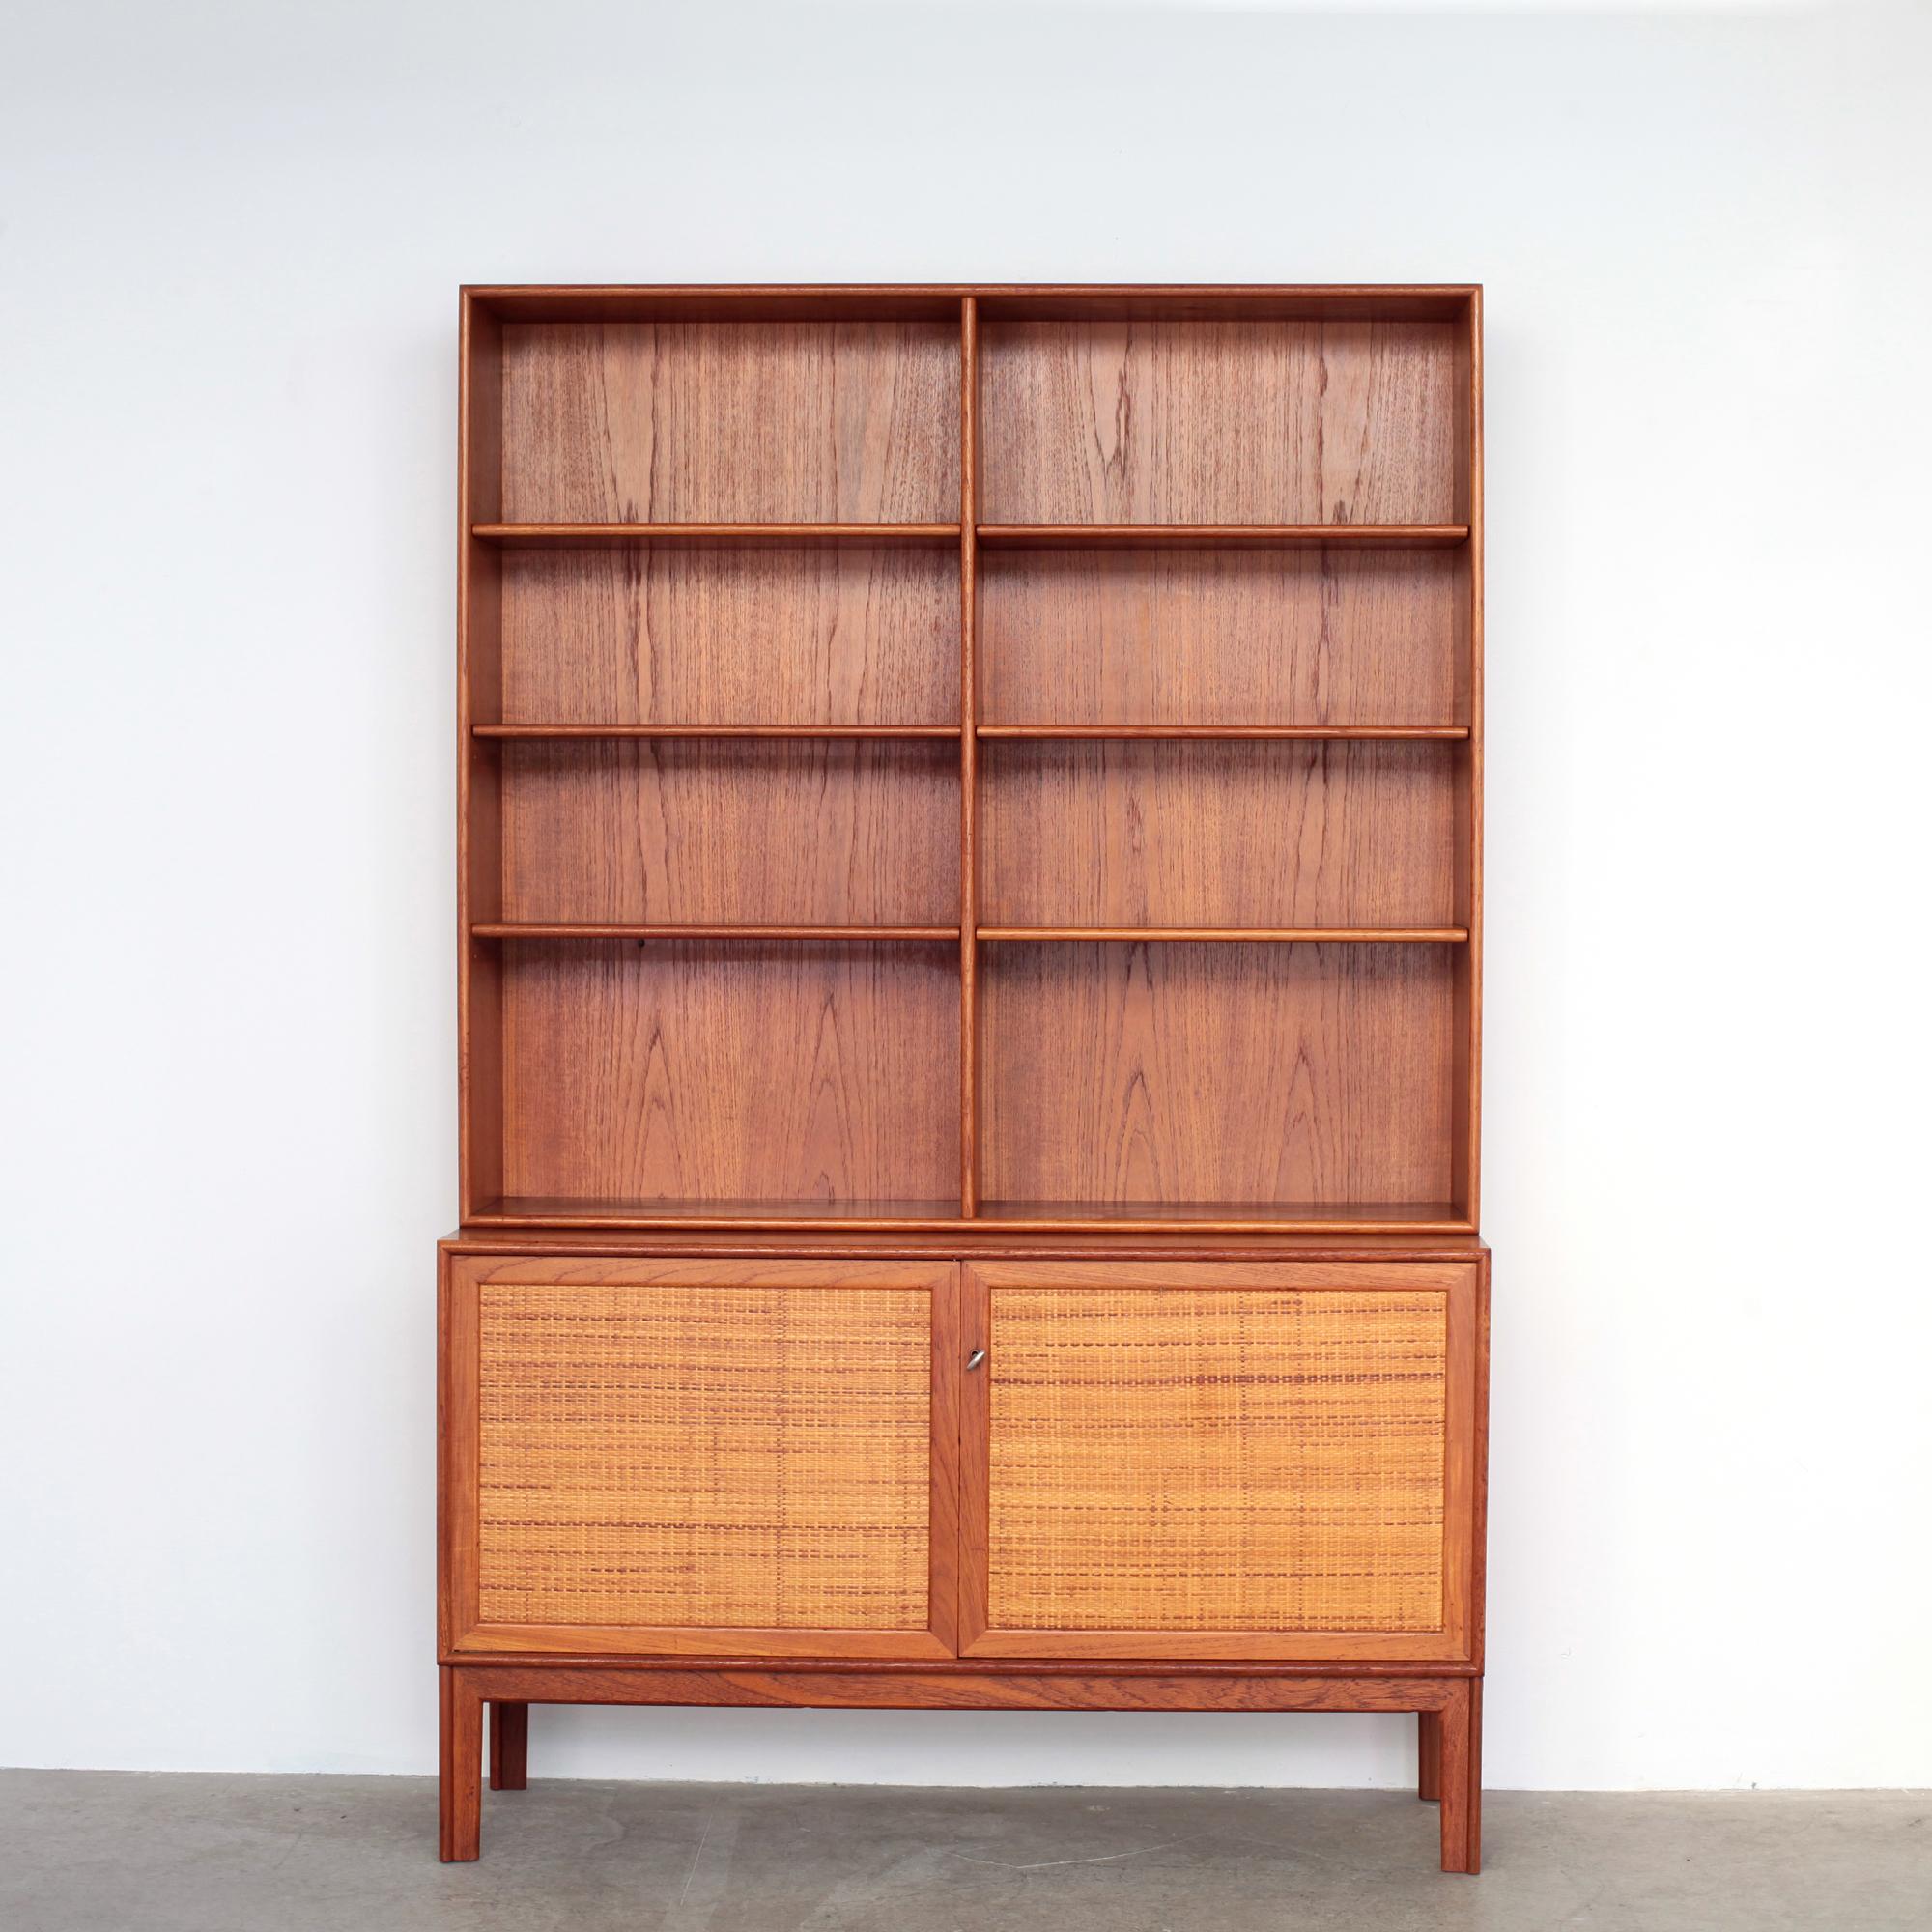 Sideboard with bookcase model Norrland designed by Alf Svensson produced by Bjästa Möbelfabrik in Sweden 1960's.
The 2 elements can be separate.
Sideboard in teak with door covered with woven rattan and adjustable shelves in birch
Bookcase in